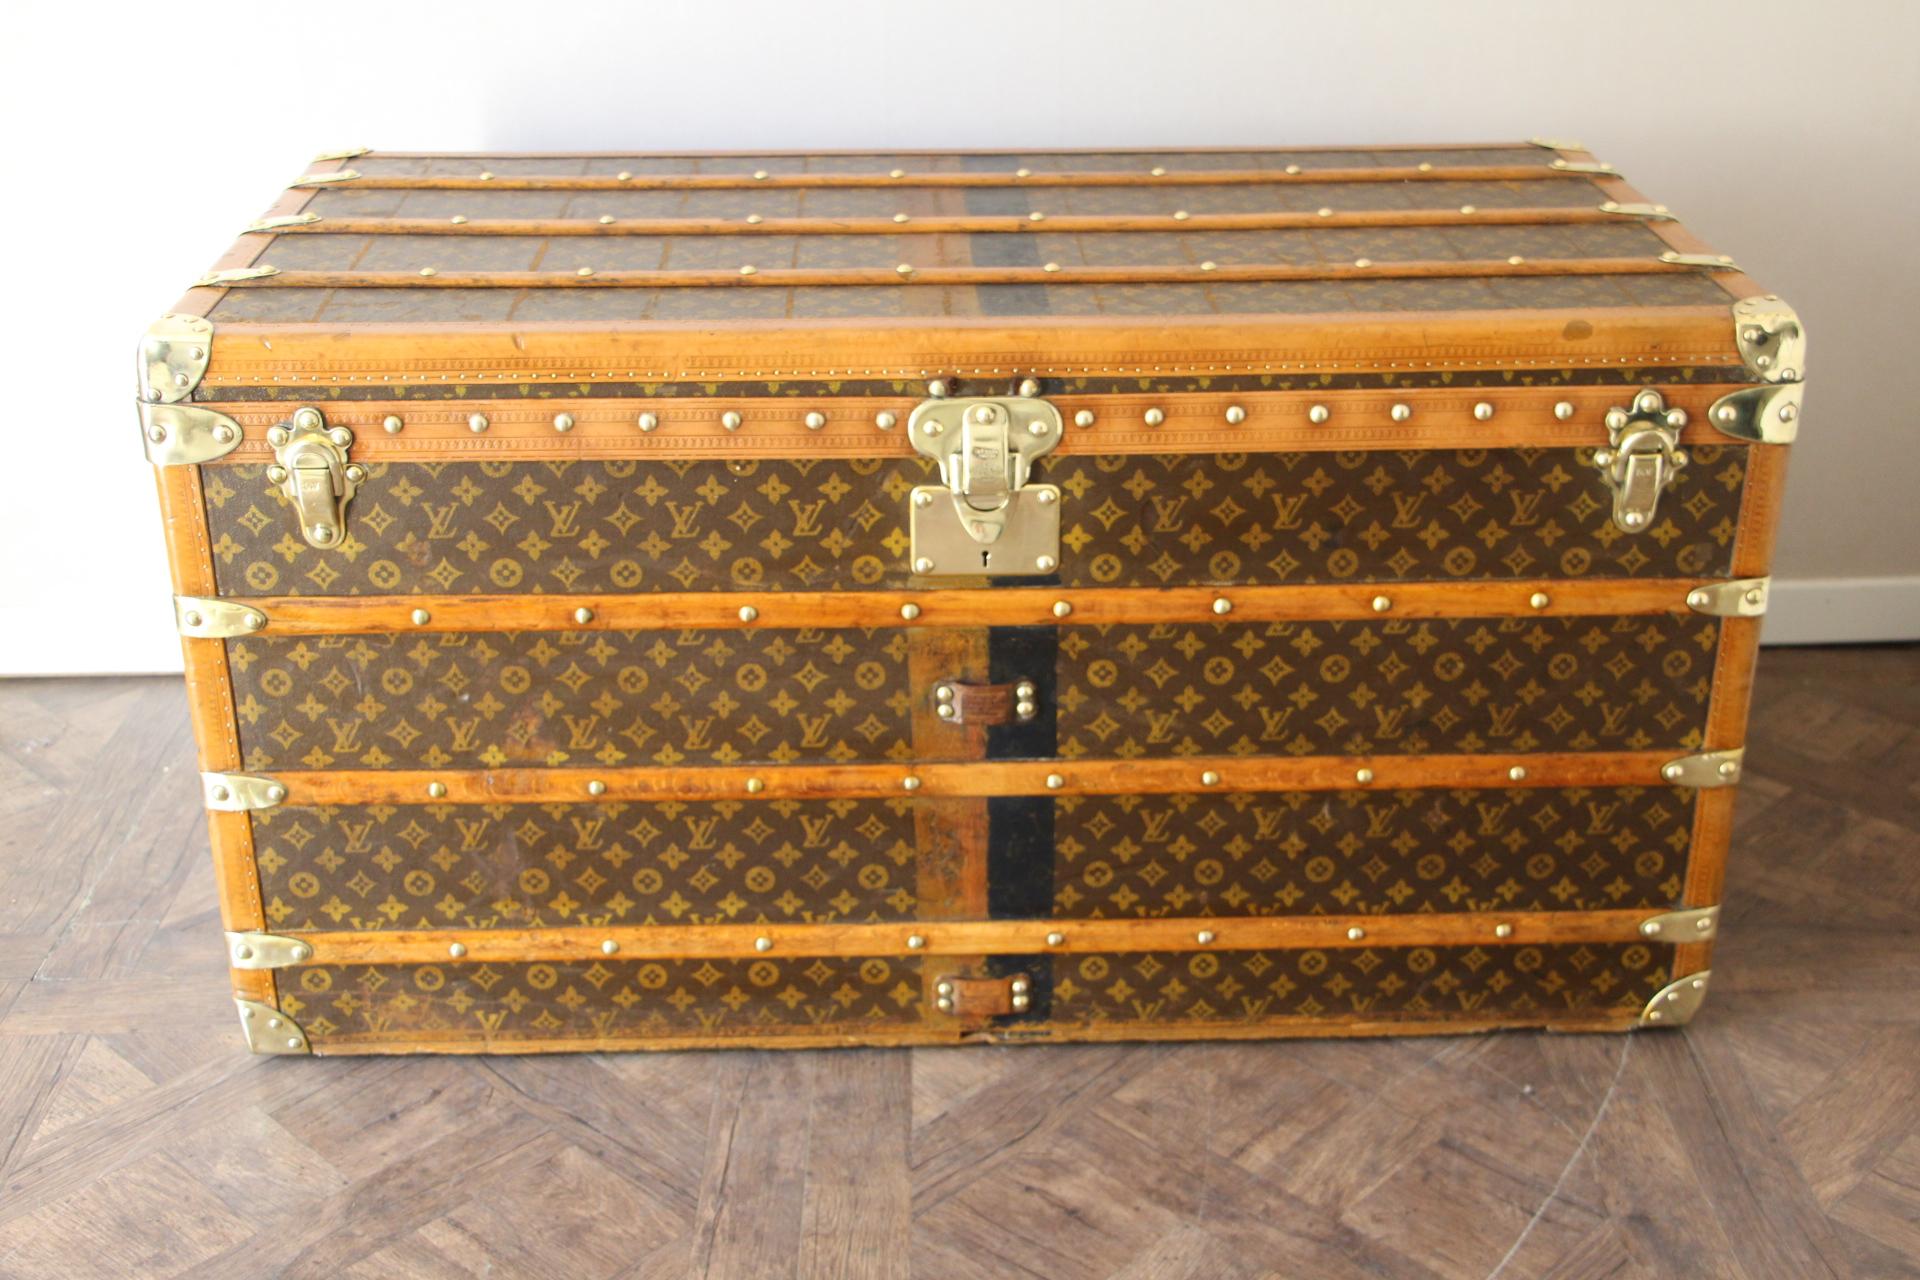 Beautiful Louis Vuitton steamer trunk featuring stenciled canvas, all honey color lozine trim, solid brass Louis Vuitton stamped clasps and lock, solid brass corners and large leather side handles. Measure: 110 cm
Customizes painted stripes. Very